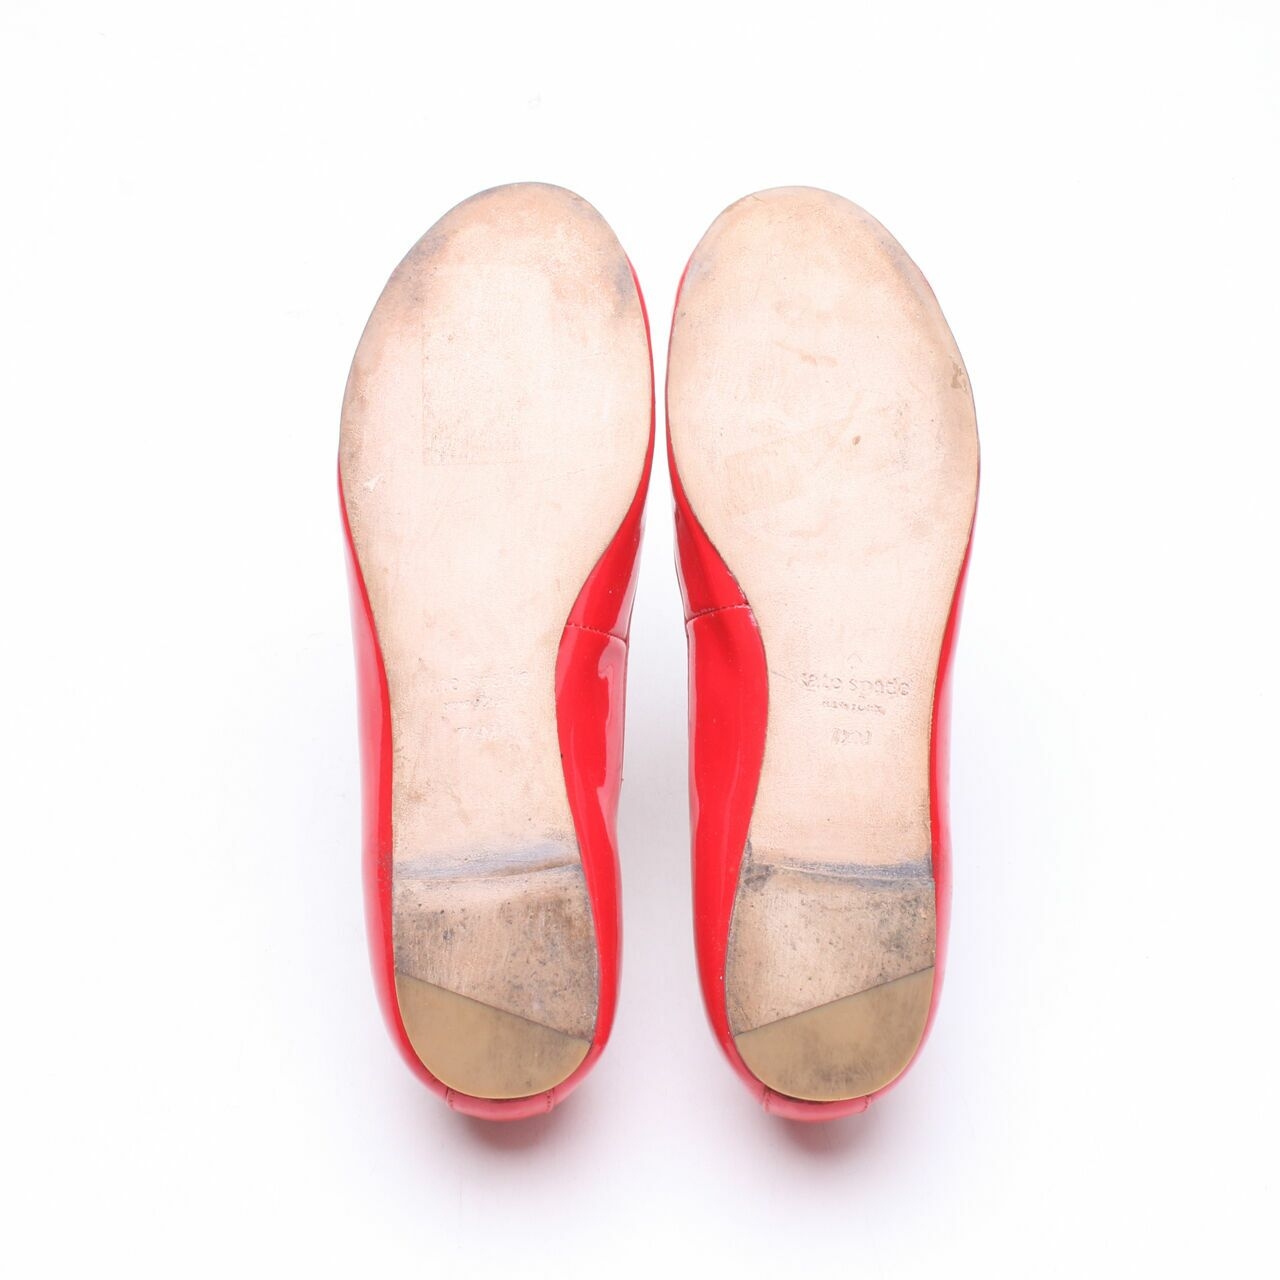 Kate Spade Red Flats